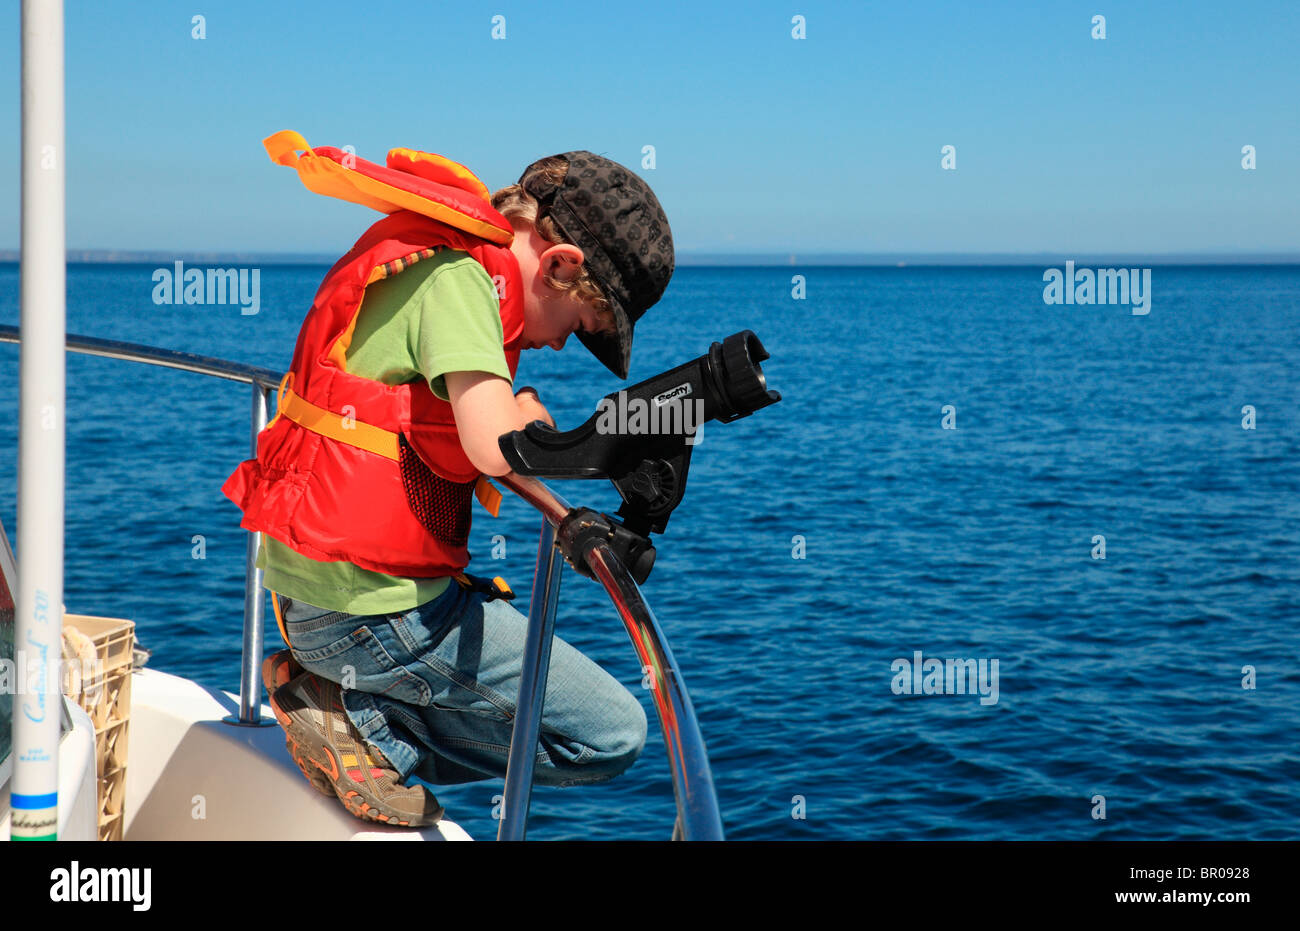 Young boy boating Stock Photo